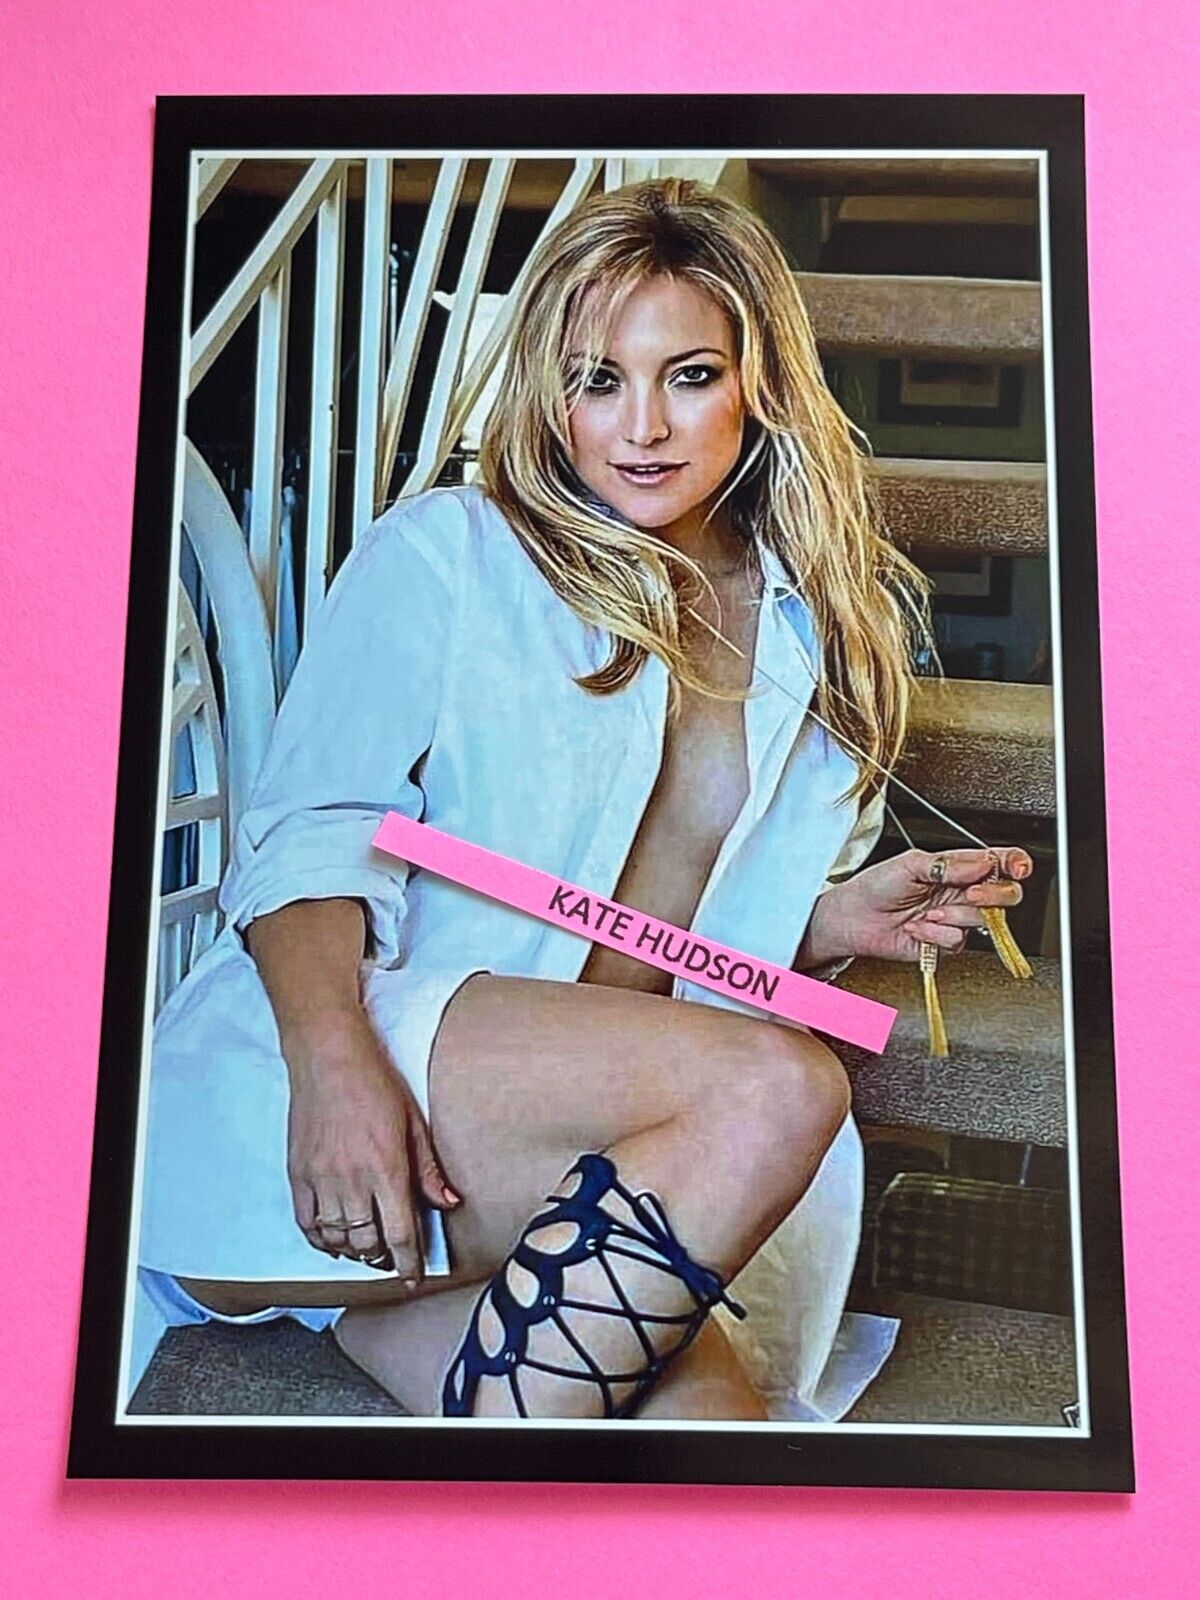 KATE HUDSON Photo Beautiful Sexy Celebrity Hollywood Actor & Model 4X6